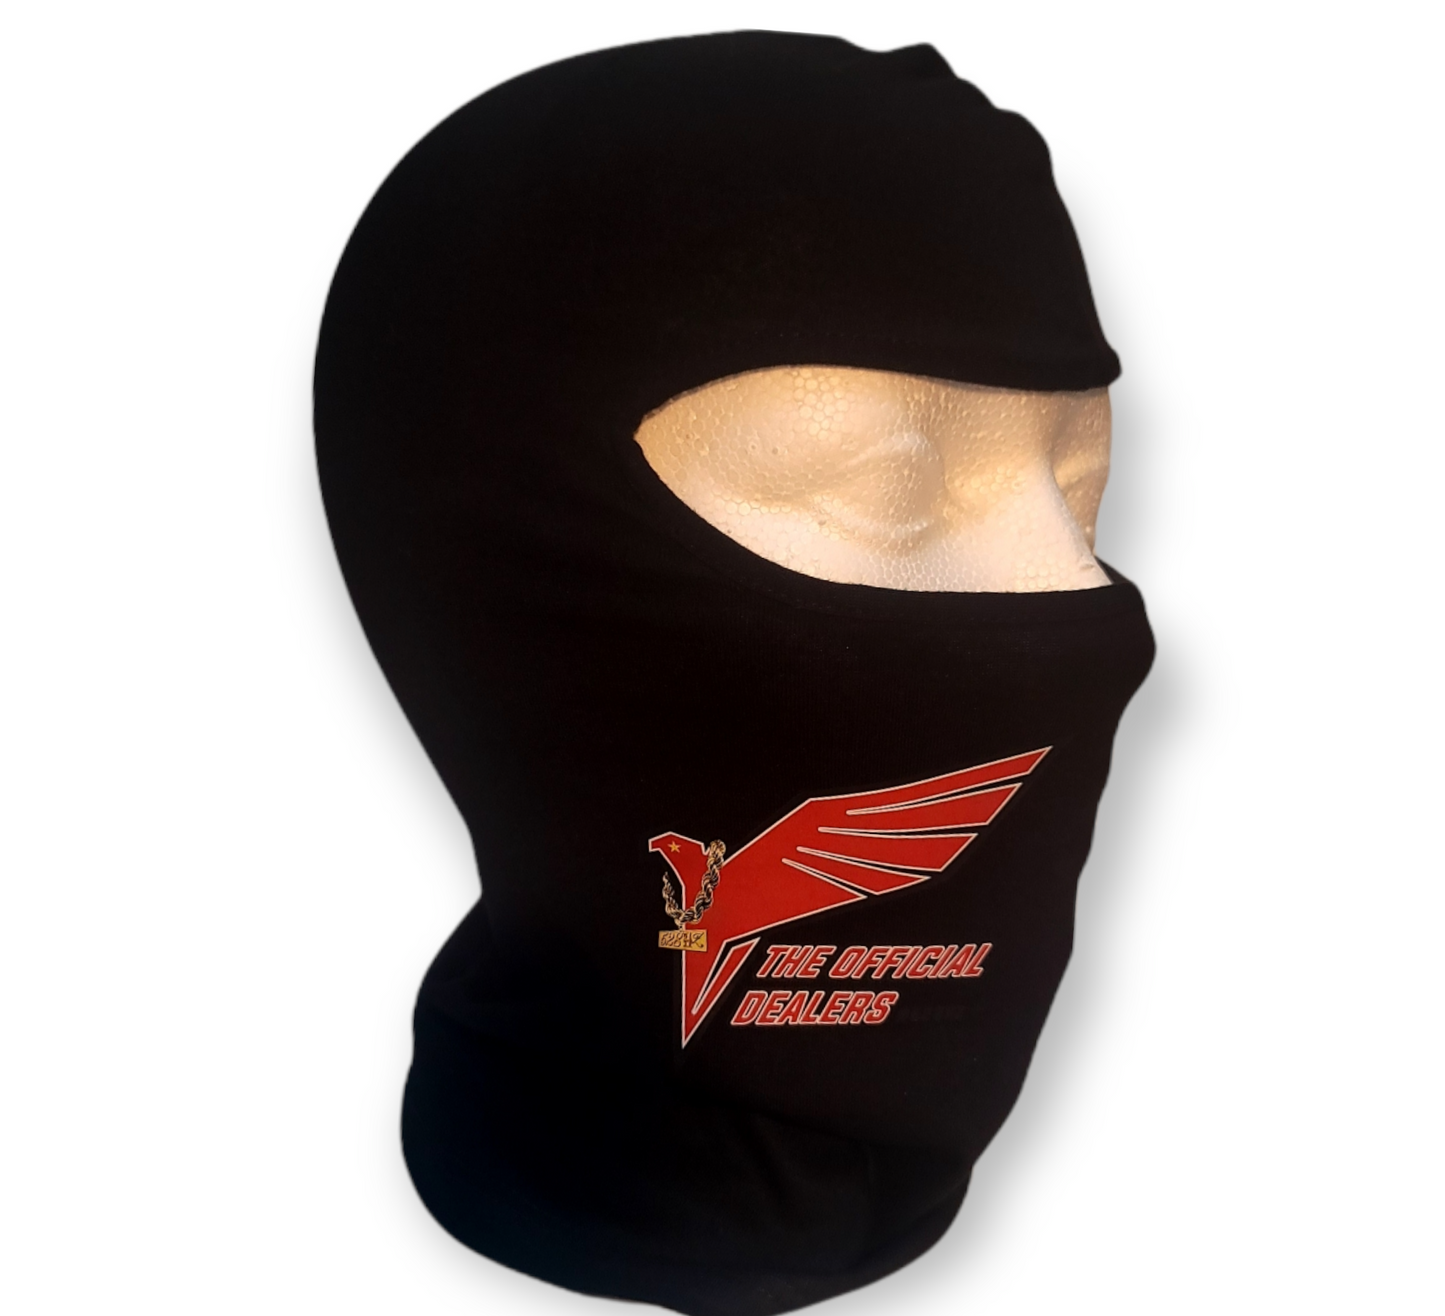 Ninja Ski Mask (Black) Comes with free Stickers - The Official Dealers